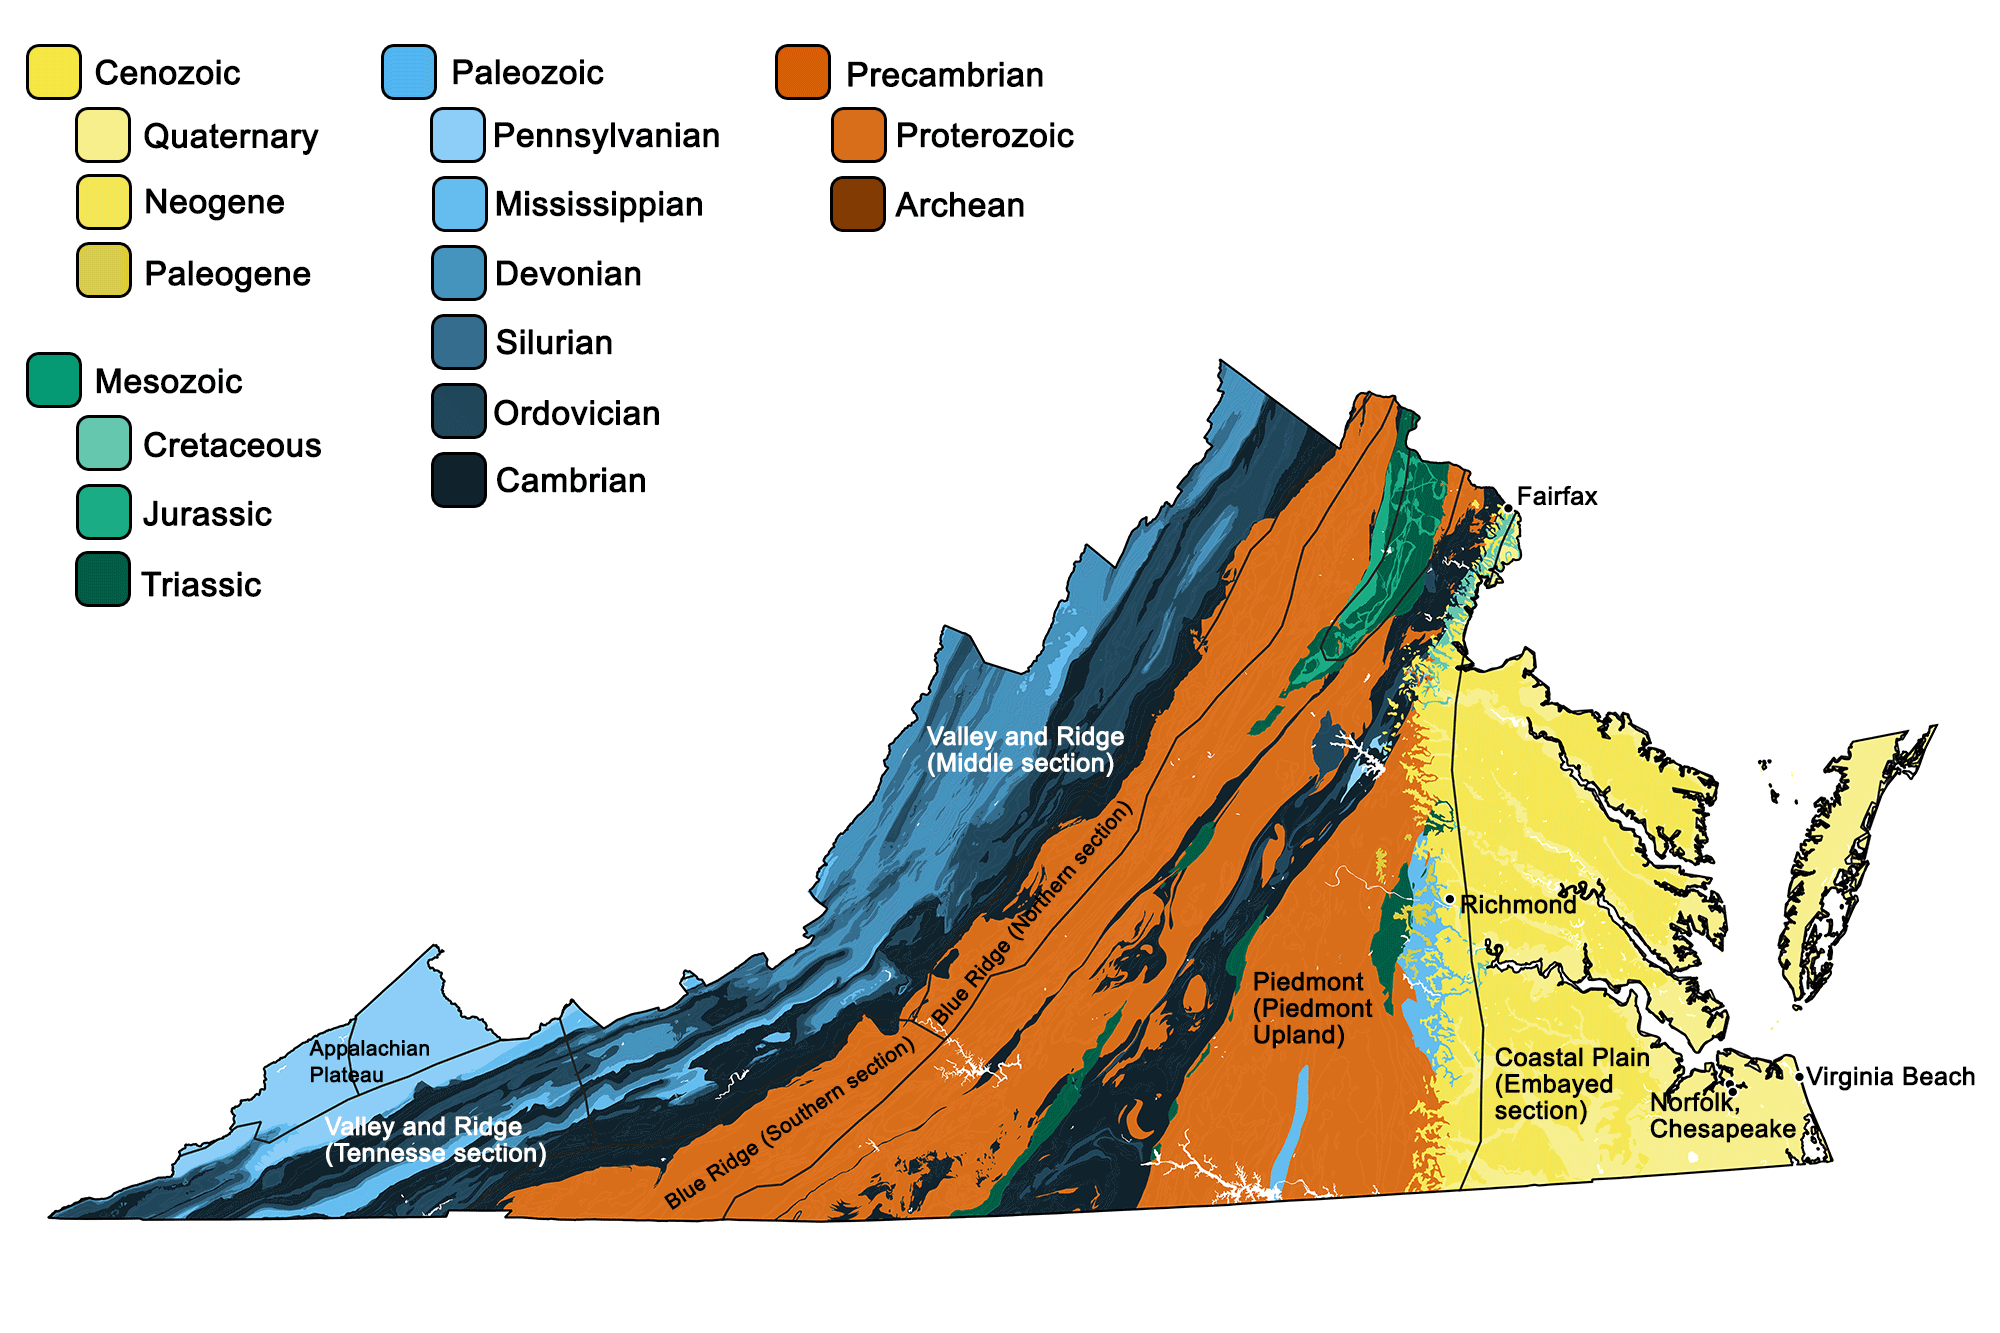 Geologic map of Virginia with physiographic regions identified.